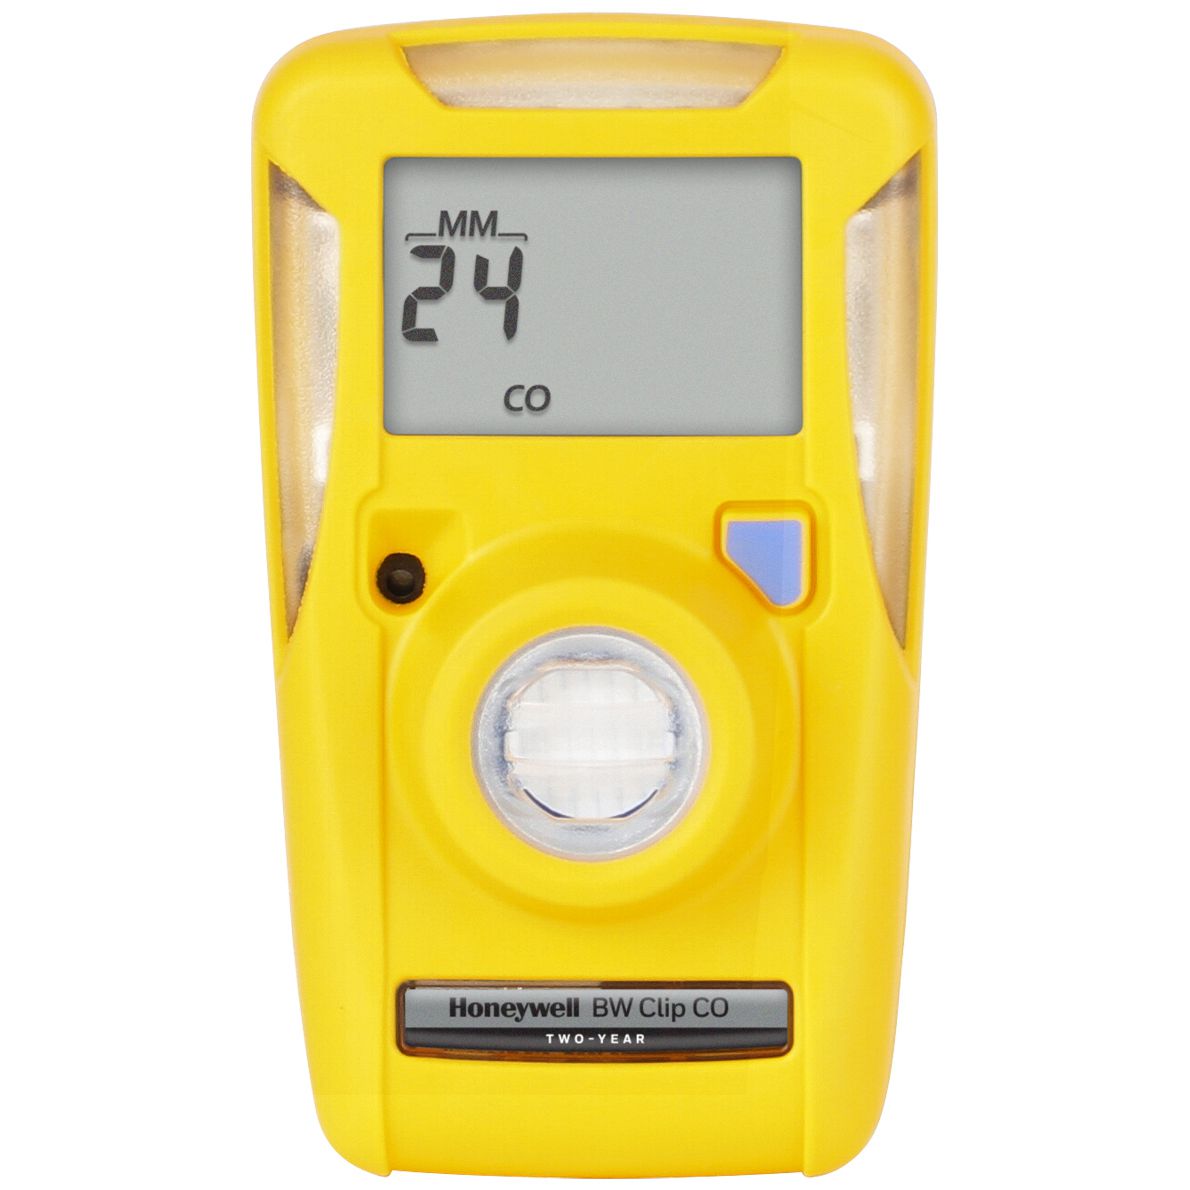 BW Clip RT single gas detector - with CO sensor (0-300 ppm) - A1=20 ppm / A2=50 ppm - 2 years runtime (extendable)